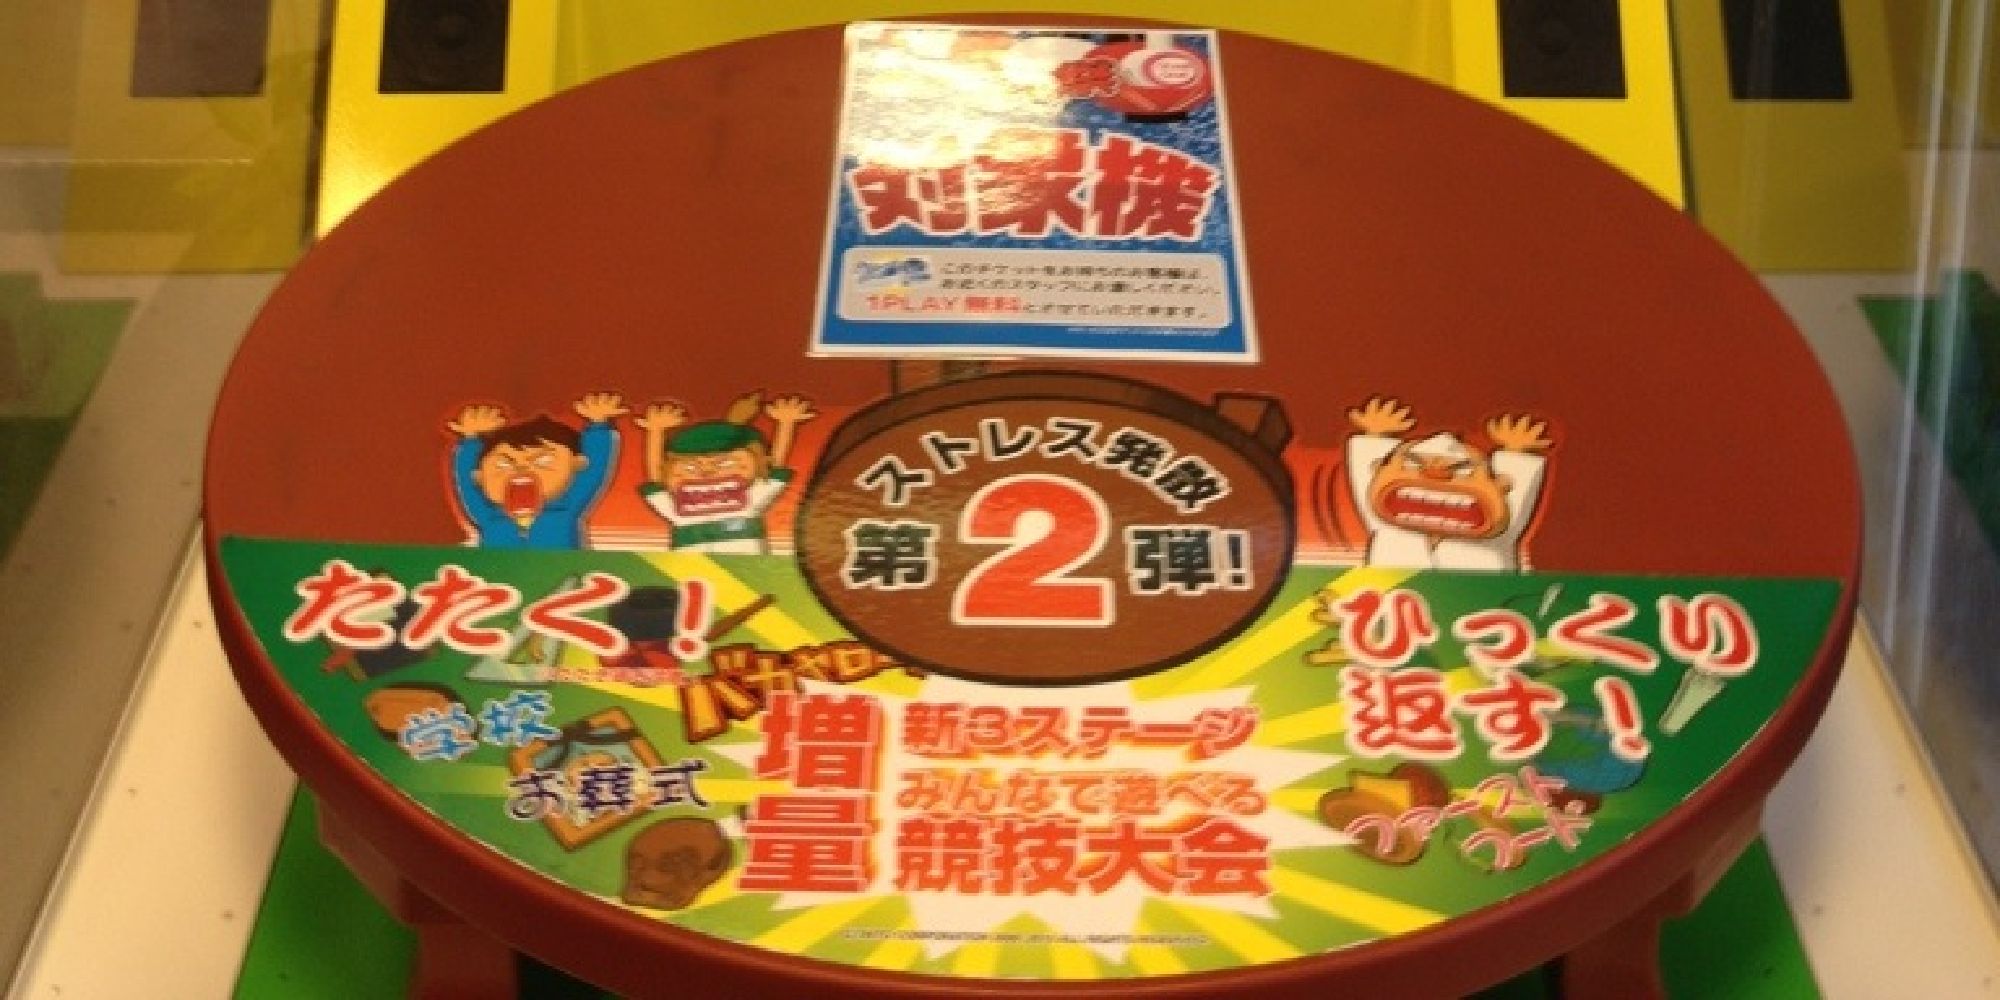 A photo of the Cho Chabudai Gaeshi 2 arcade machine, showing its unique table controller with angry chibi people on it